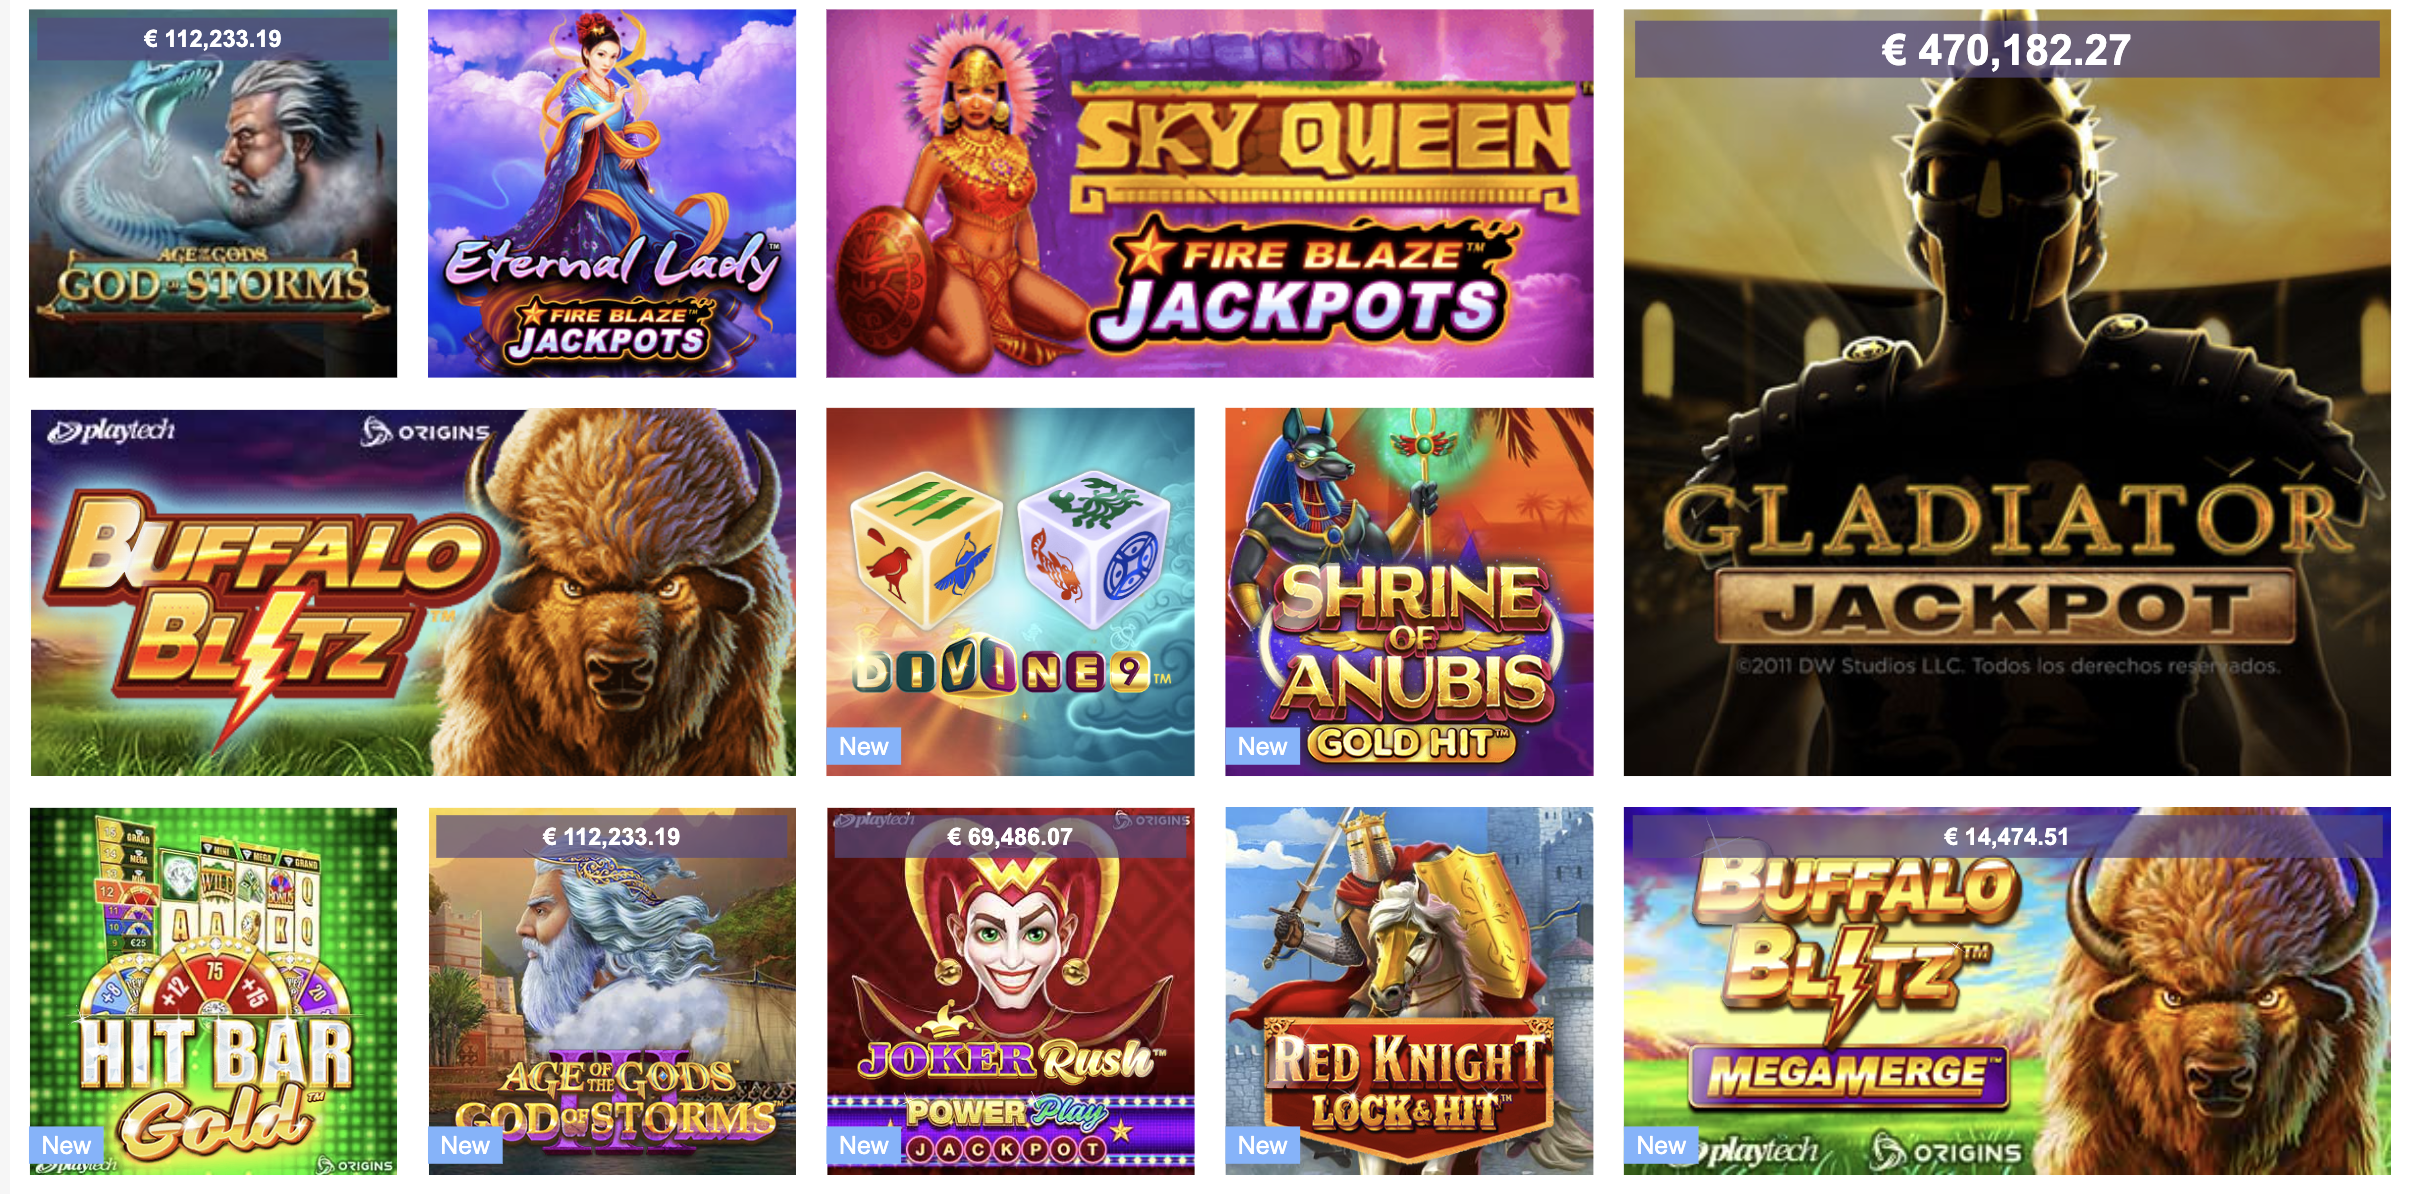 Europa Casino Review: Bonuses, Games, and Beyond